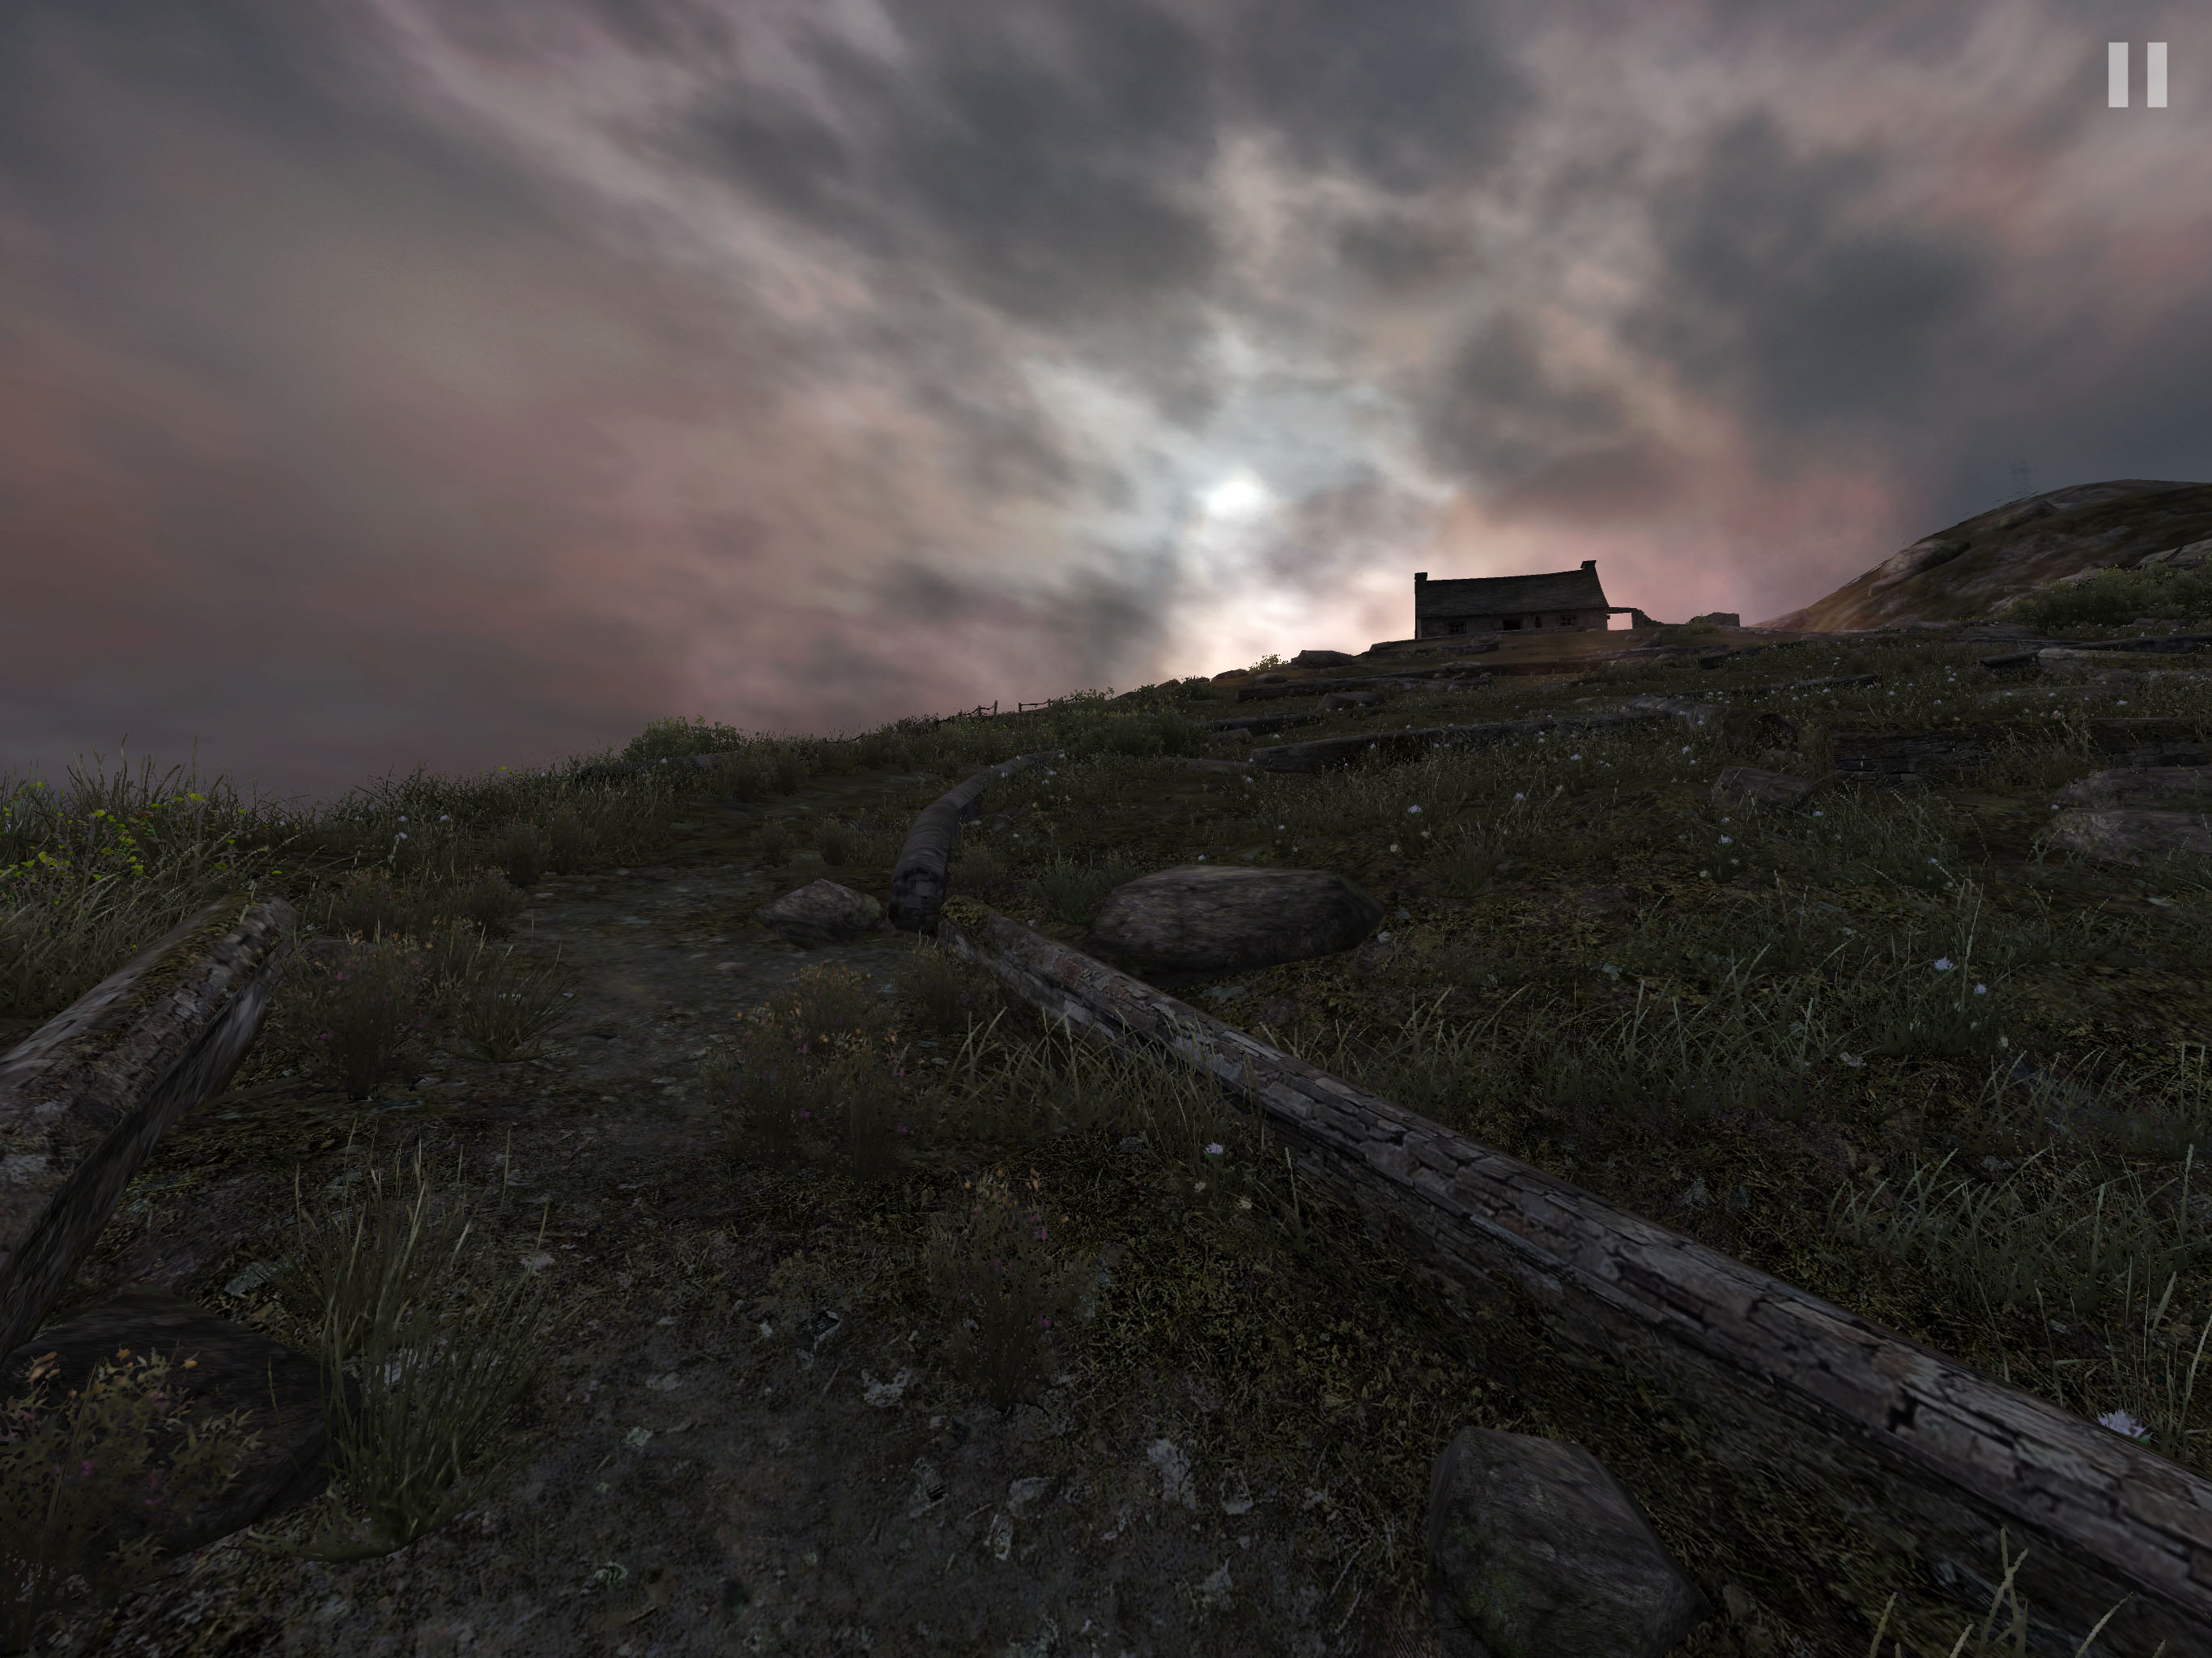 A 3D rendered view a grassy hill as night approaches and there's a small house in the distance